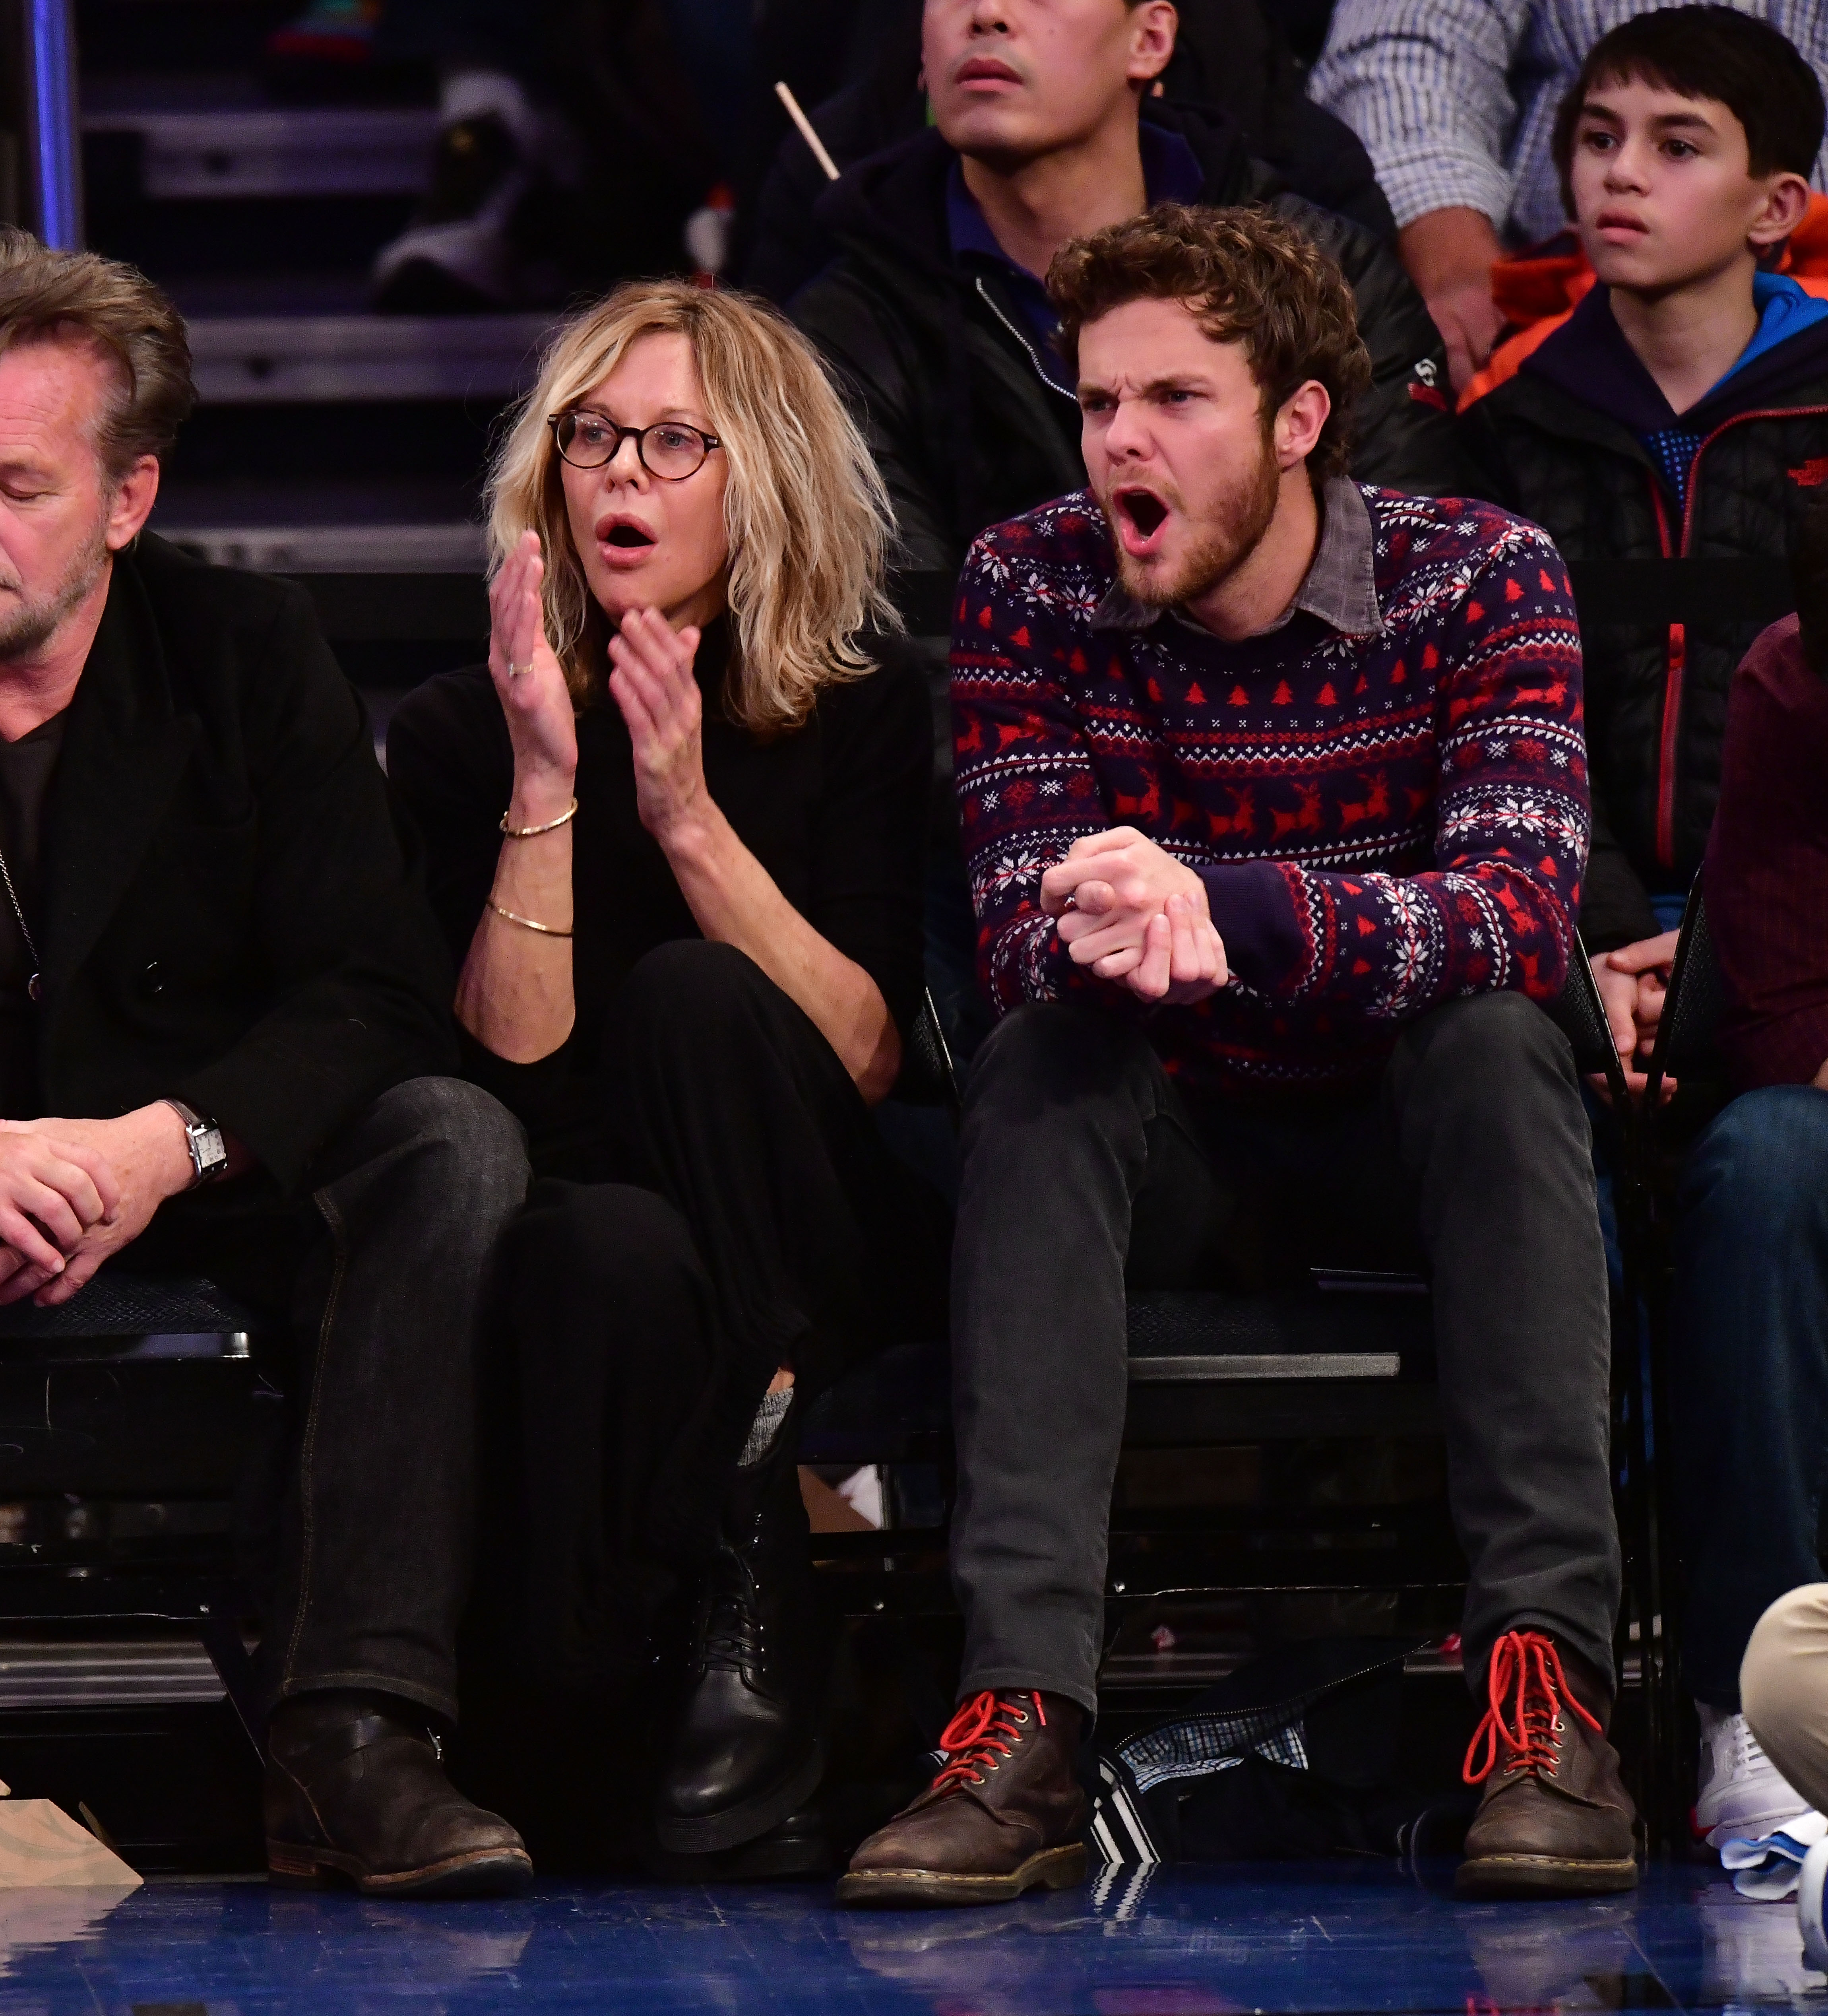 Meg Ryan and Jack Quaid attend a basketball game on December 25, 2017 in New York City. | Source: Getty Images